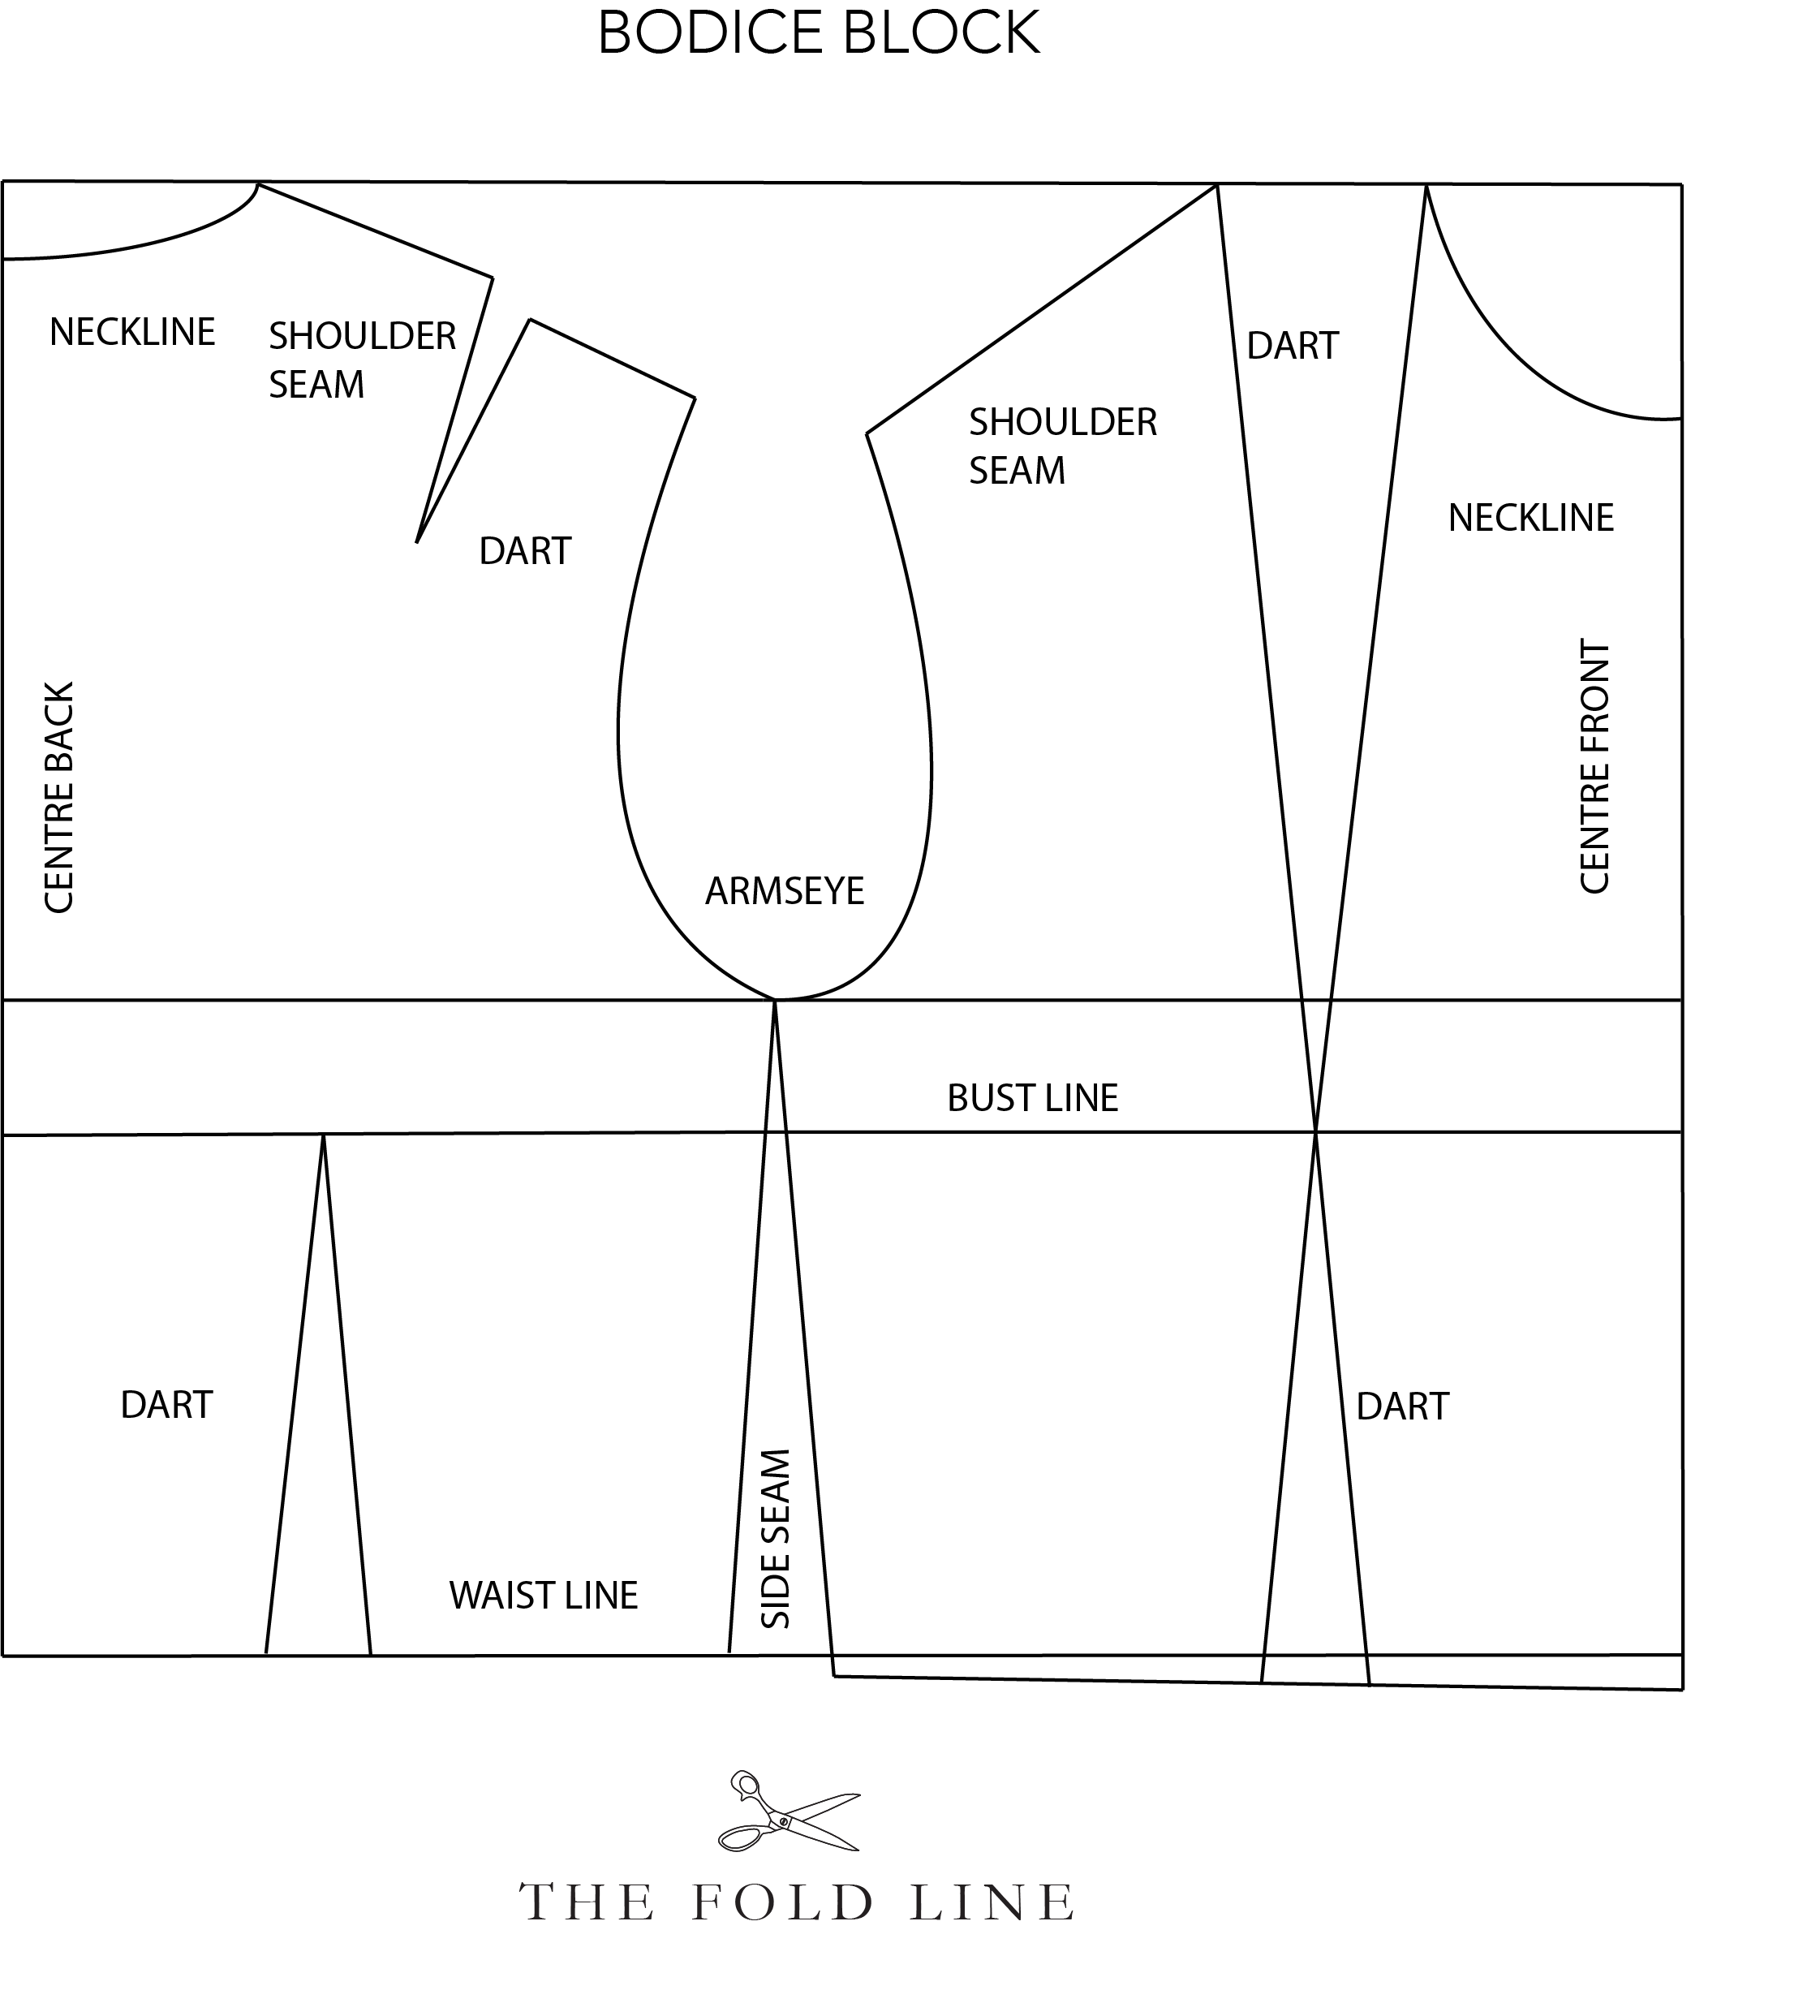 https://thefoldline.com/wp-content/uploads/2020/11/PATTERN-BLOCK-HOW-TO-DRAW-BODICE-TEMPLATE.png